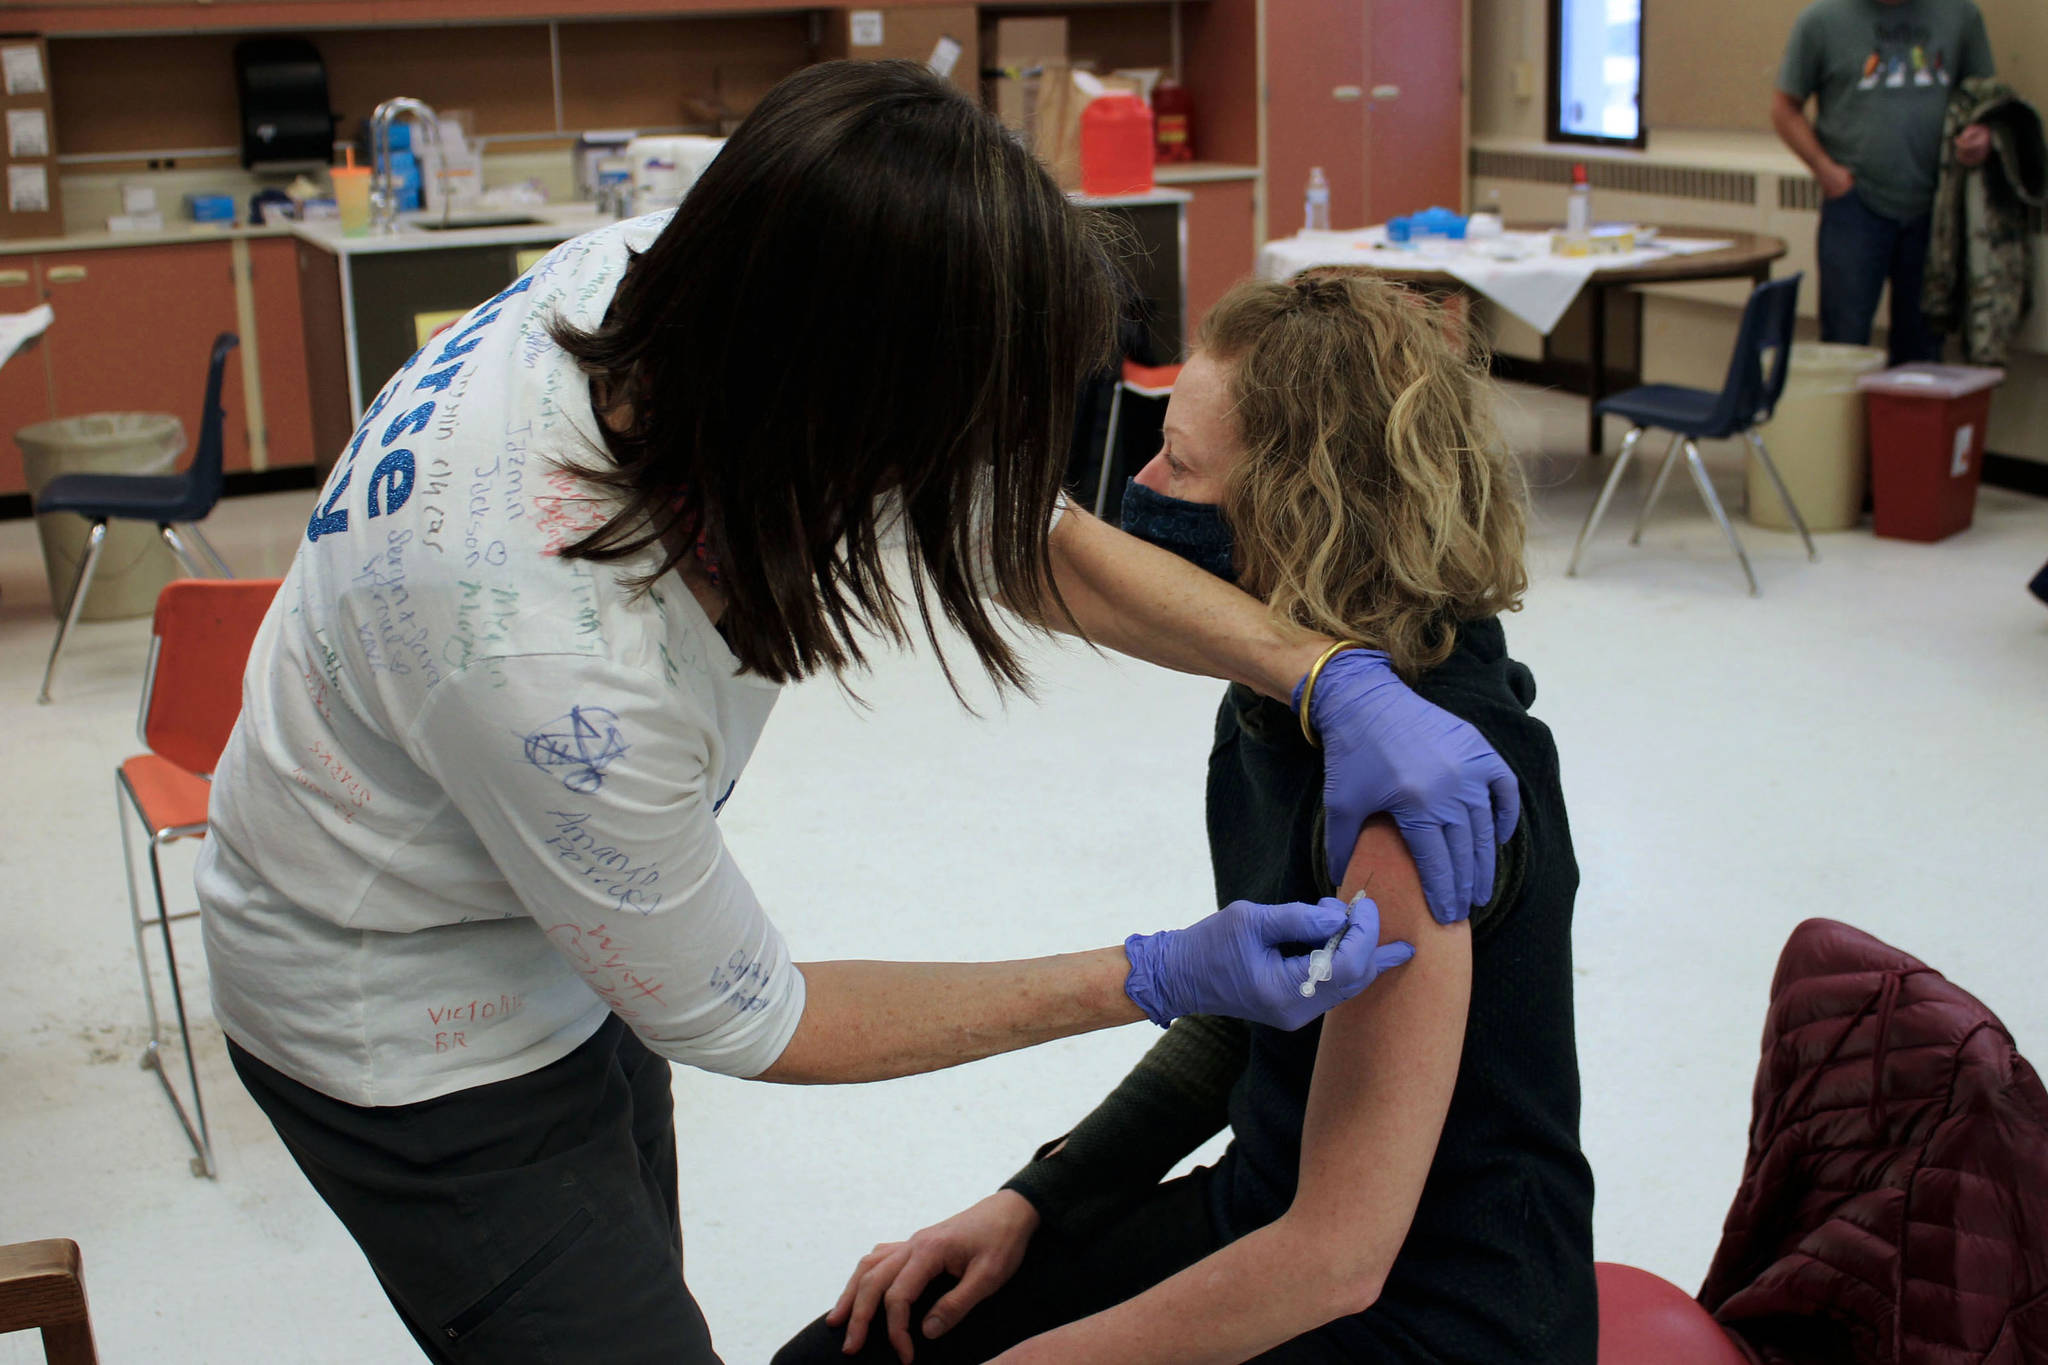 Ashlyn O’Hara/Peninsula Clarion
Tracy Silta administers a dose of a COVID-19 vaccine to Melissa Linton during a vaccine clinic at Soldotna Prep School on Feb. 26.